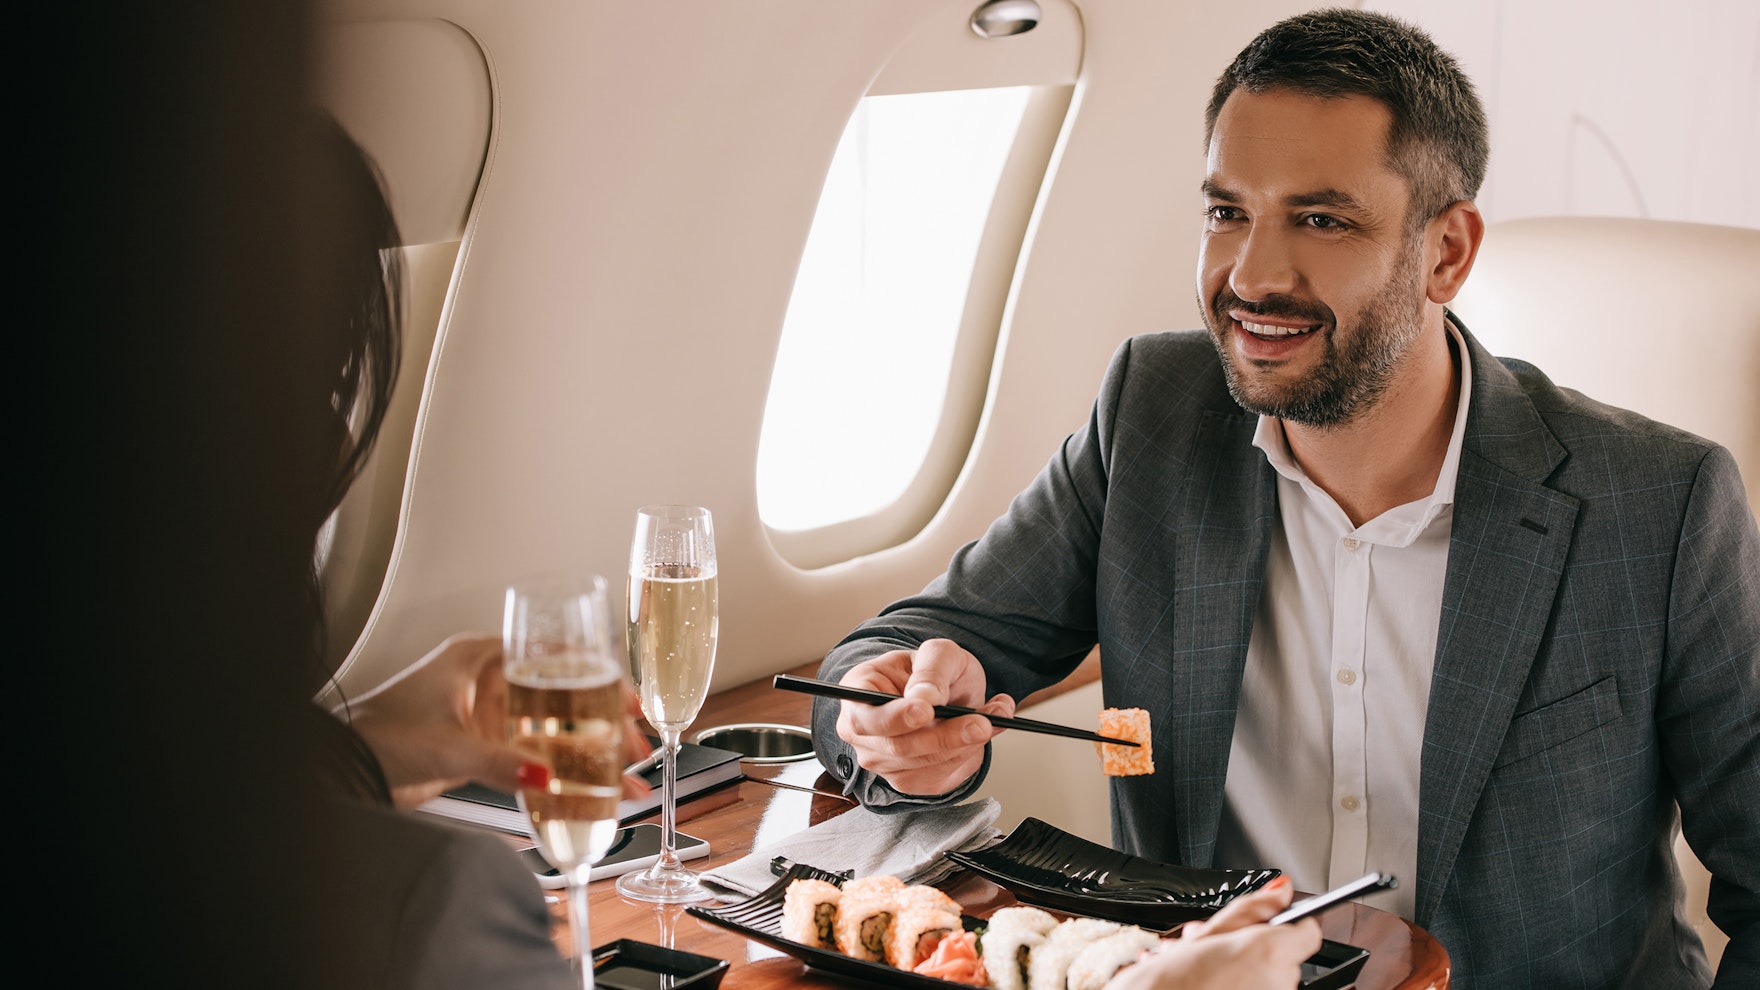 Photo Of Man Eating Sushi On Private Jet